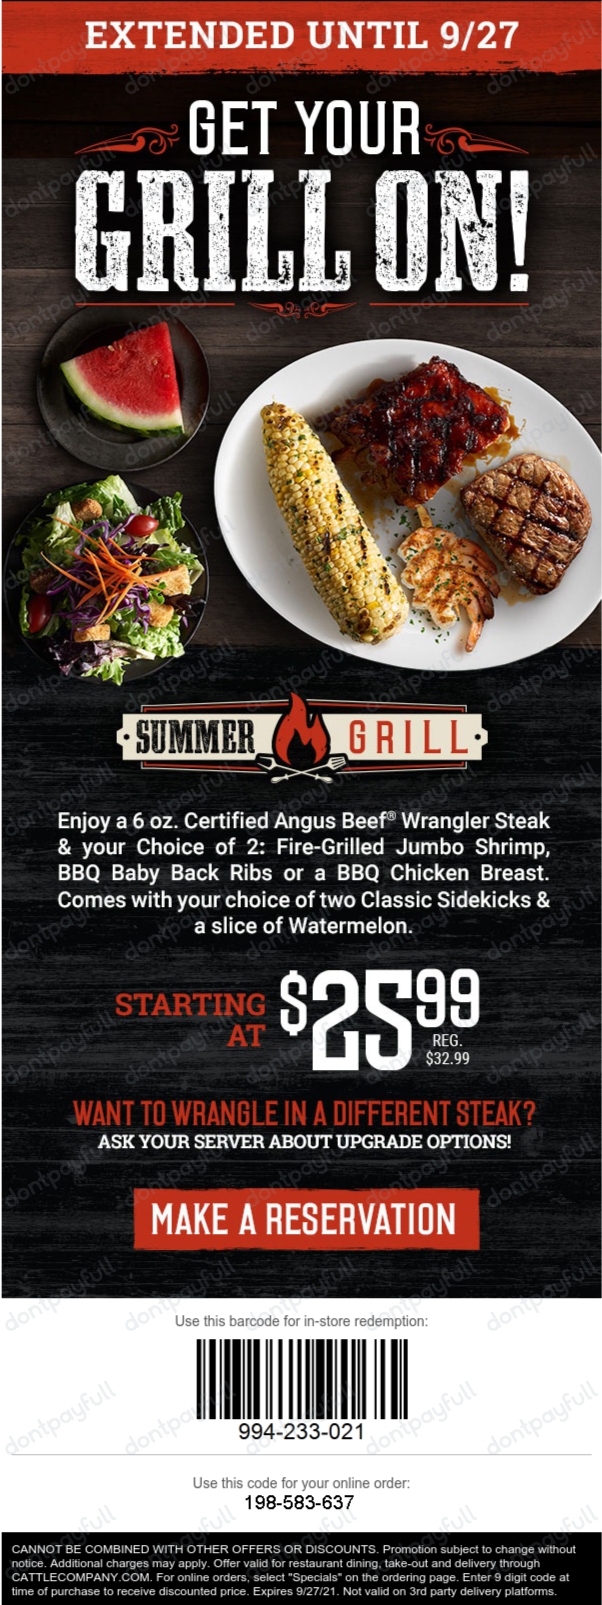 black-angus-steakhouse-coupons-15-discount-sep-2021